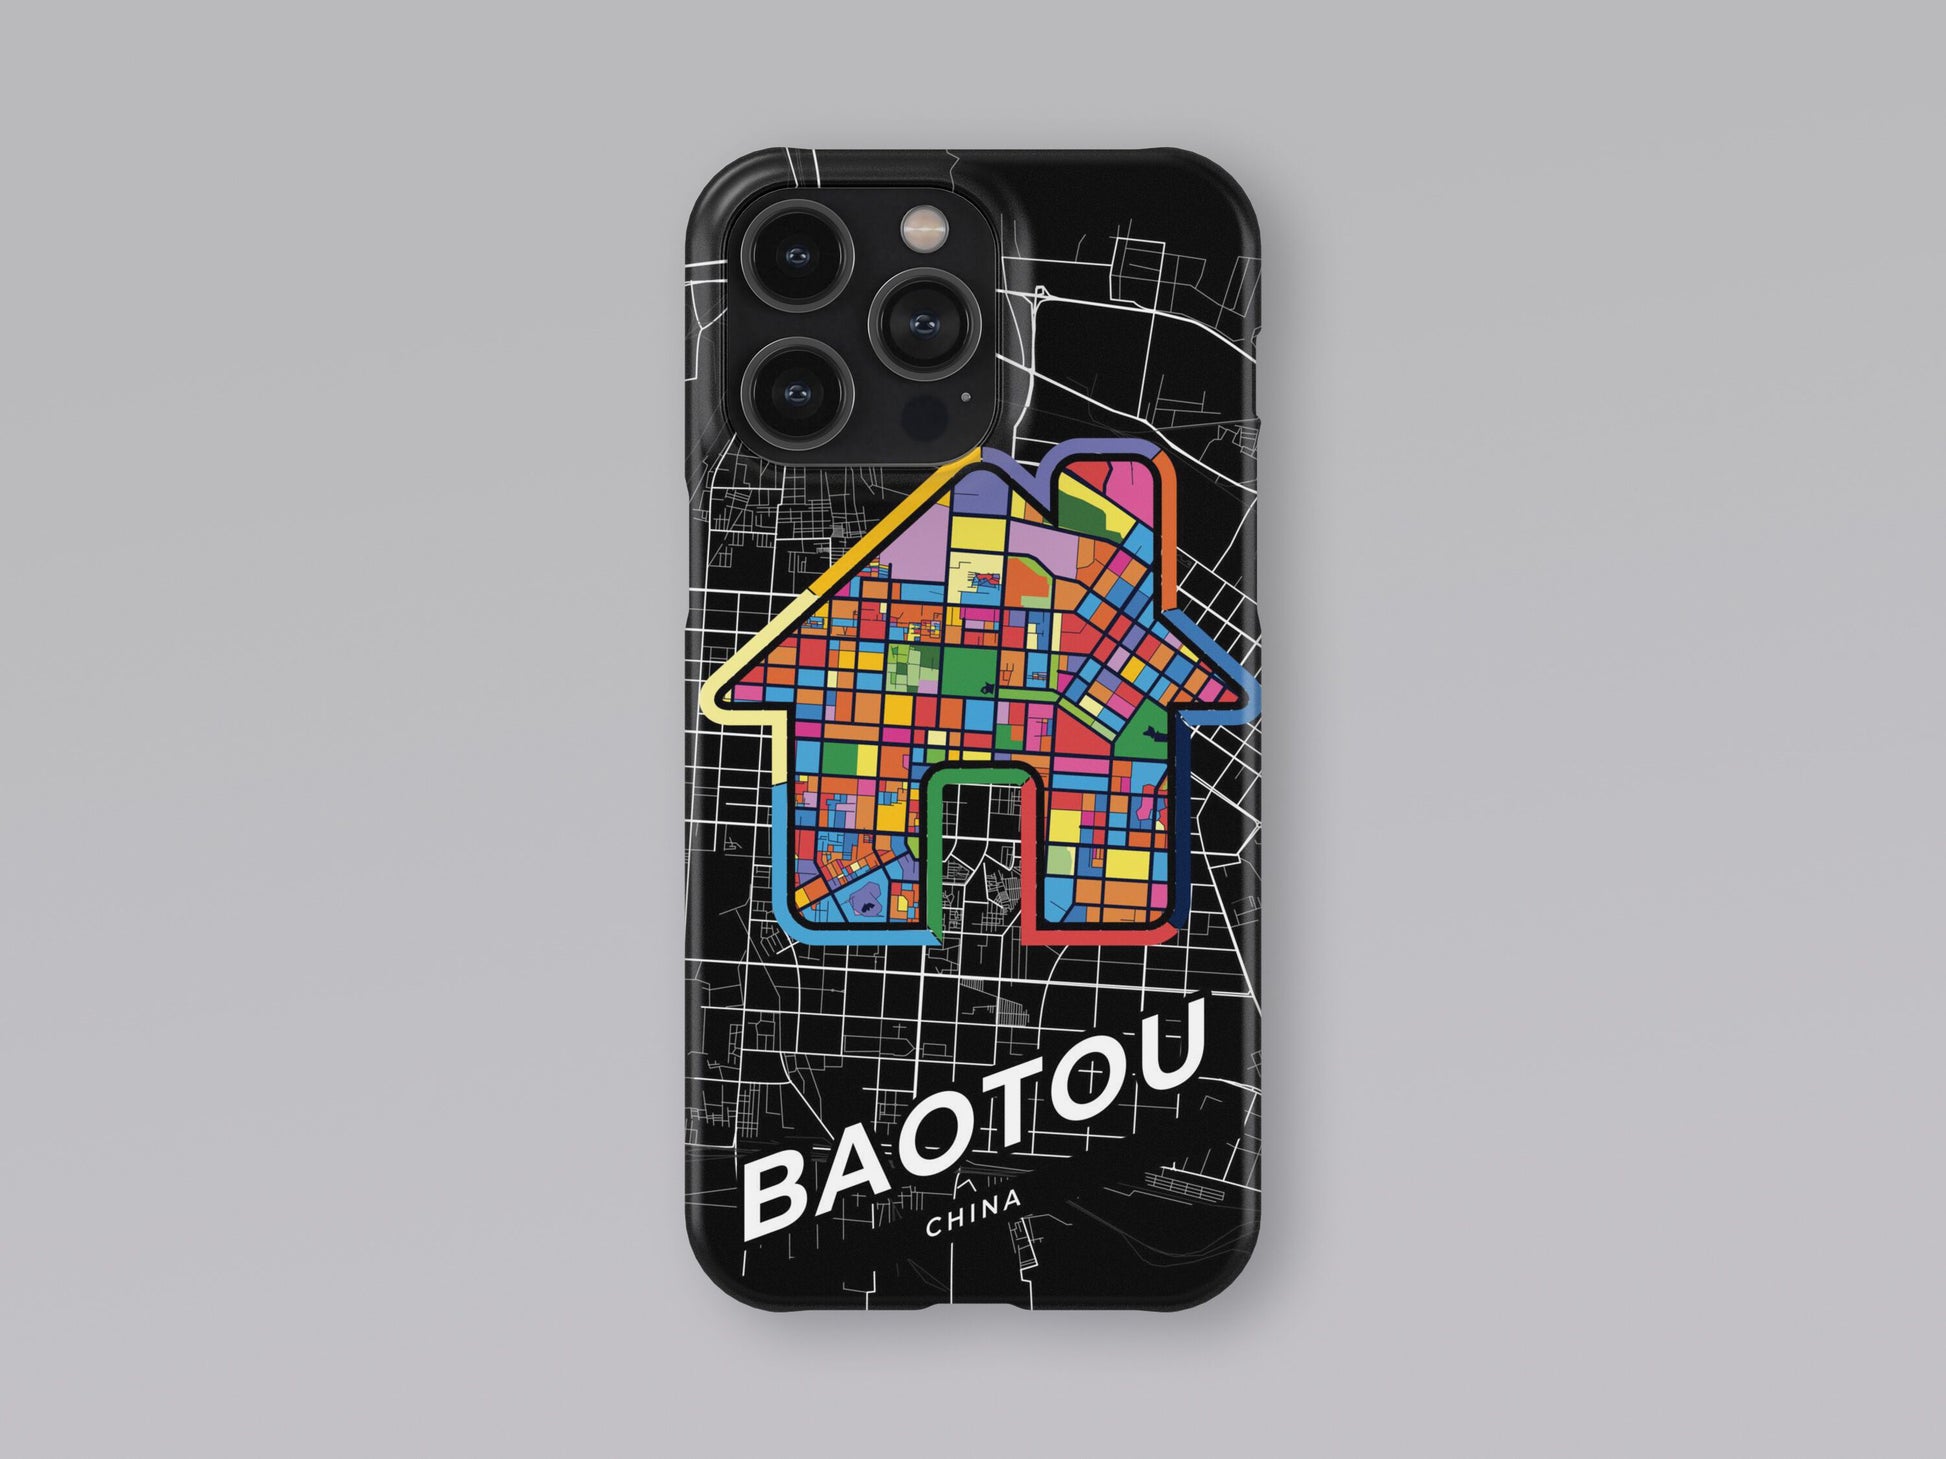 Baotou China slim phone case with colorful icon. Birthday, wedding or housewarming gift. Couple match cases. 3